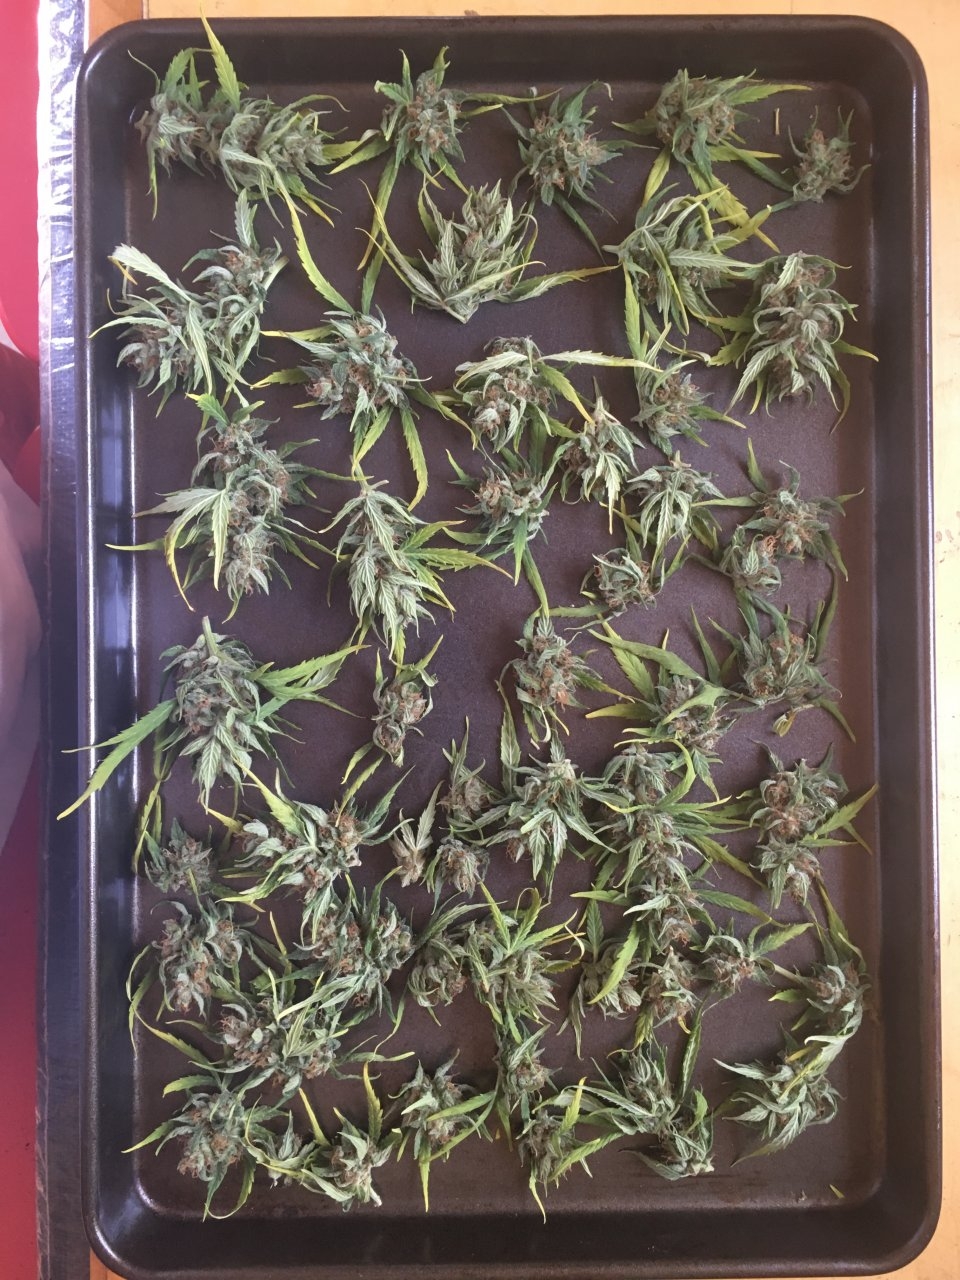 Air drying buds